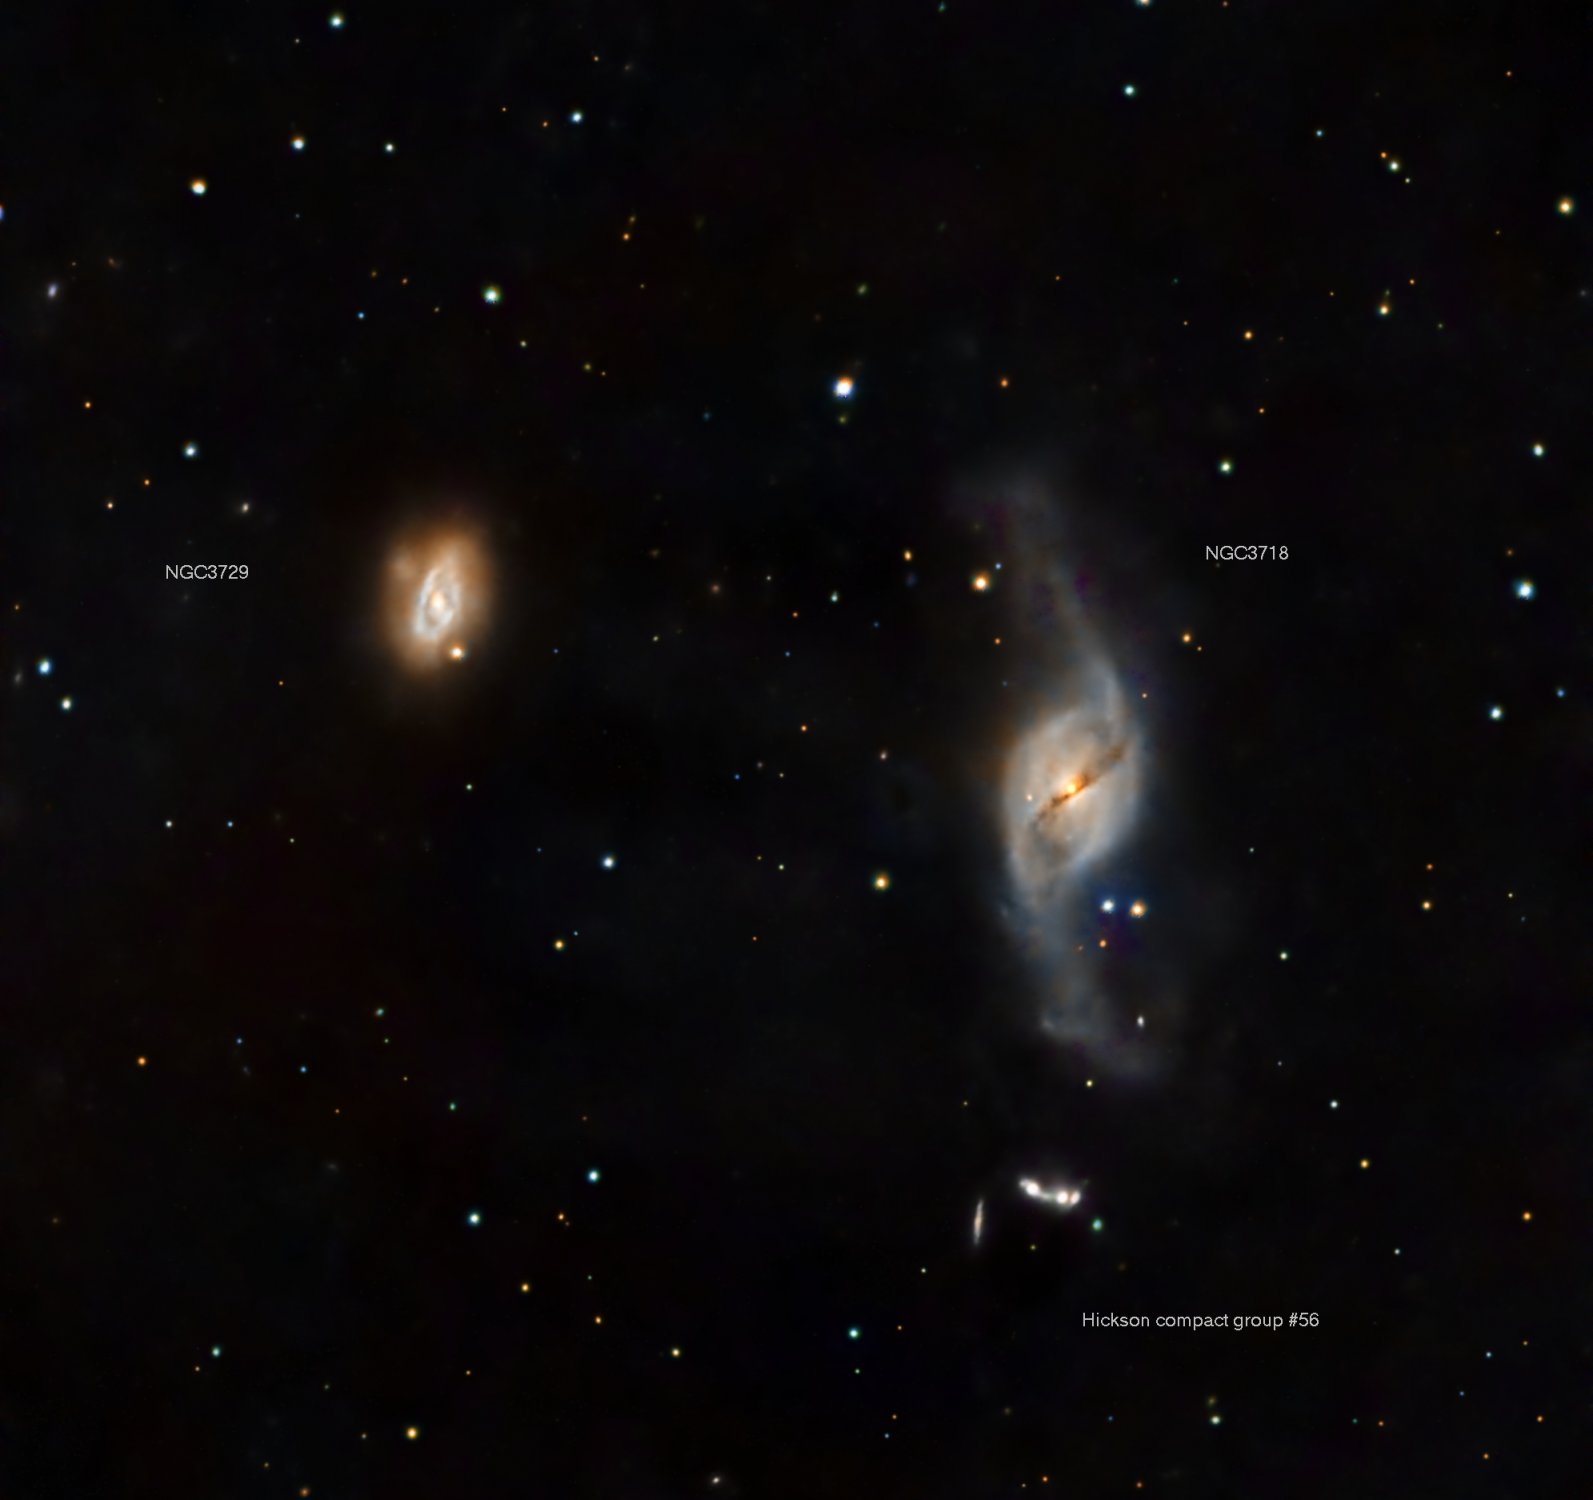 NGC3718 (annotated)